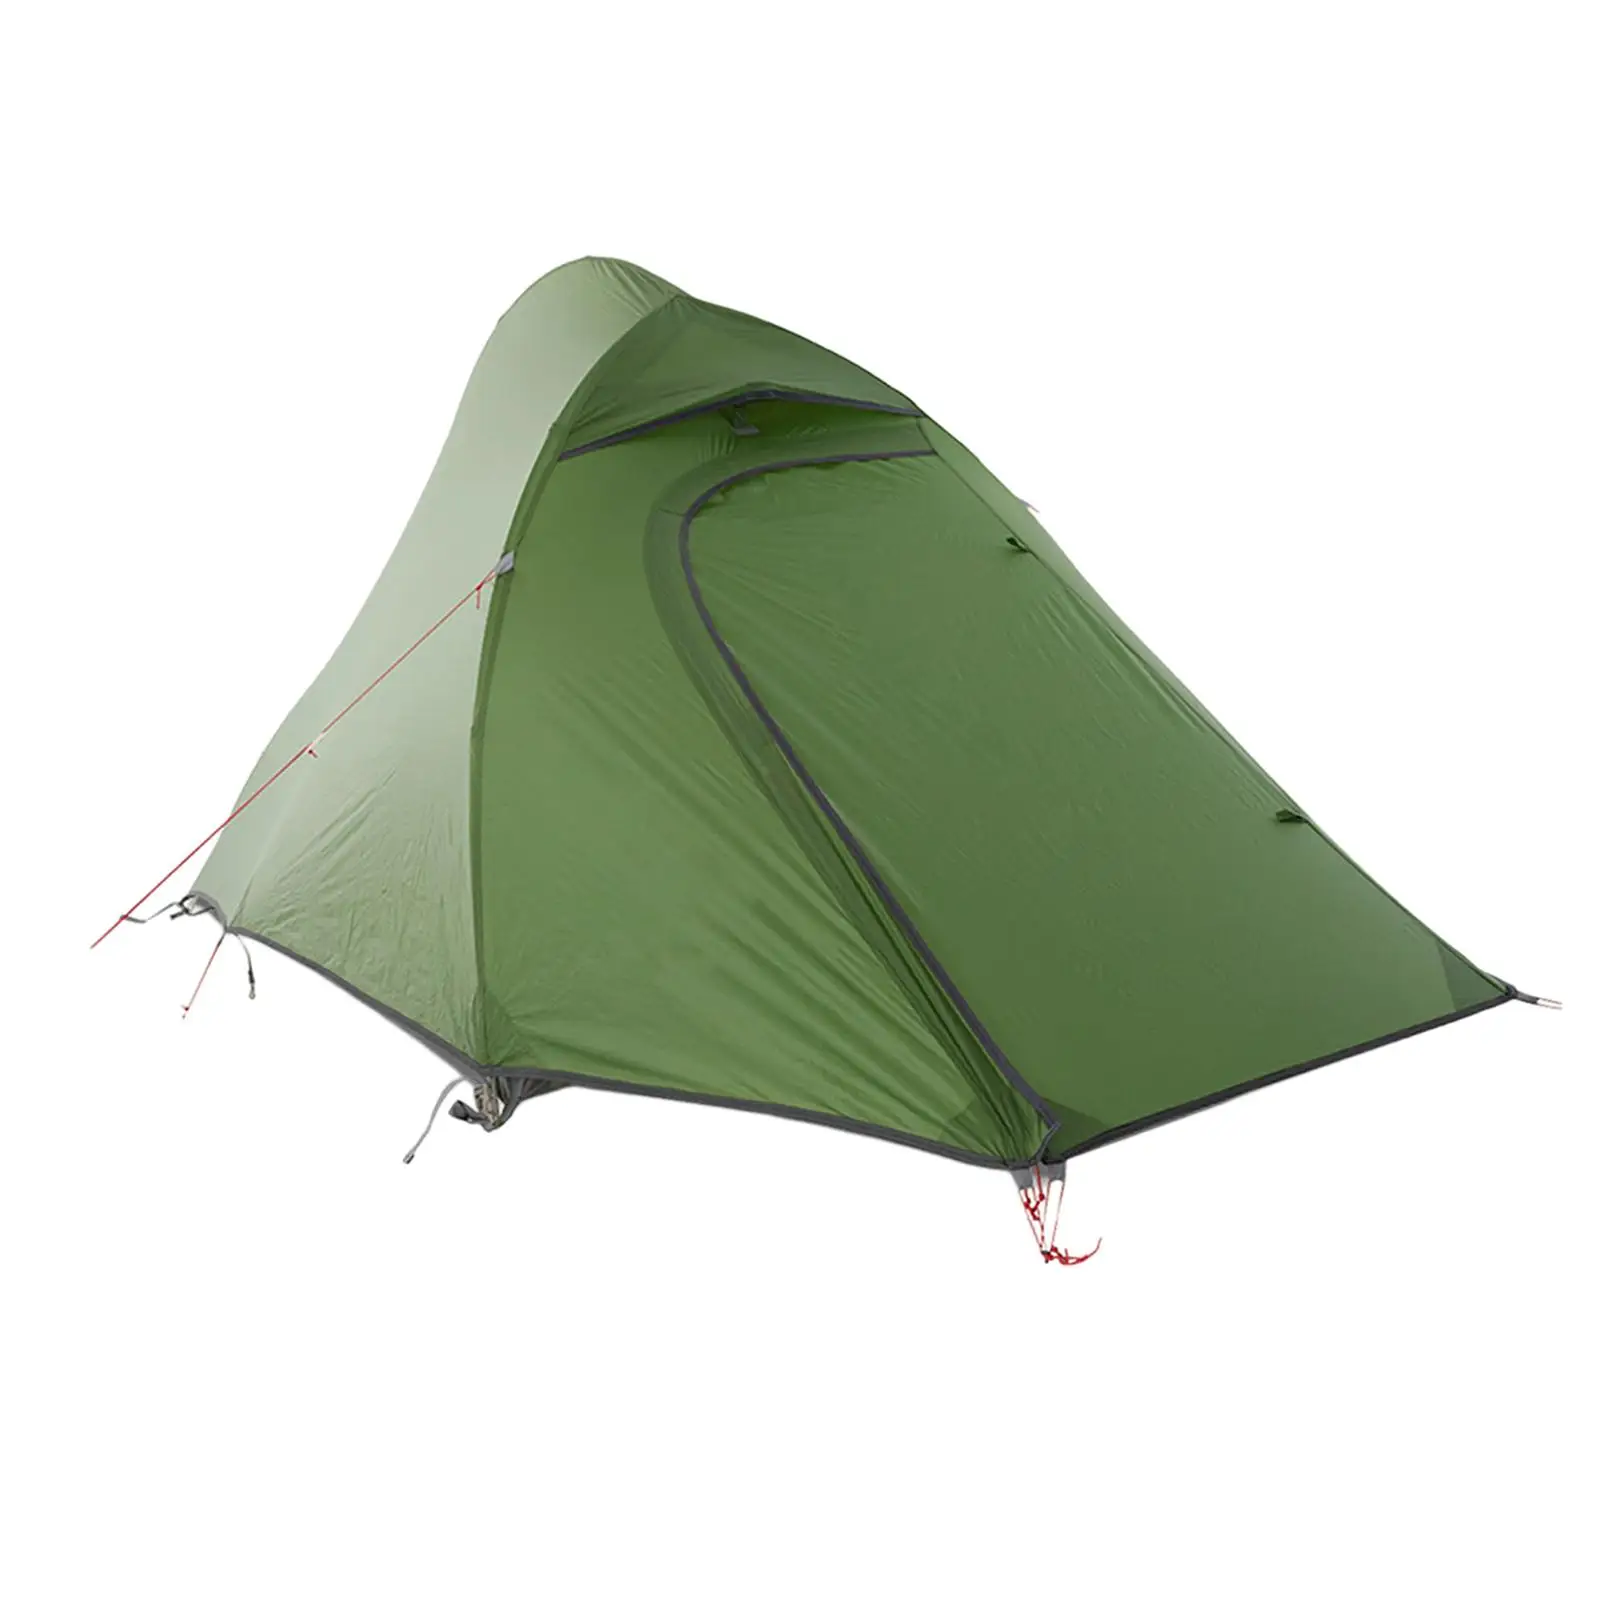 Camping Tent 2 Windows Foldable Heavy Duty with Storage Bag Trekking Tent Backpacking Tent for Travel Picnic Garden Fishing